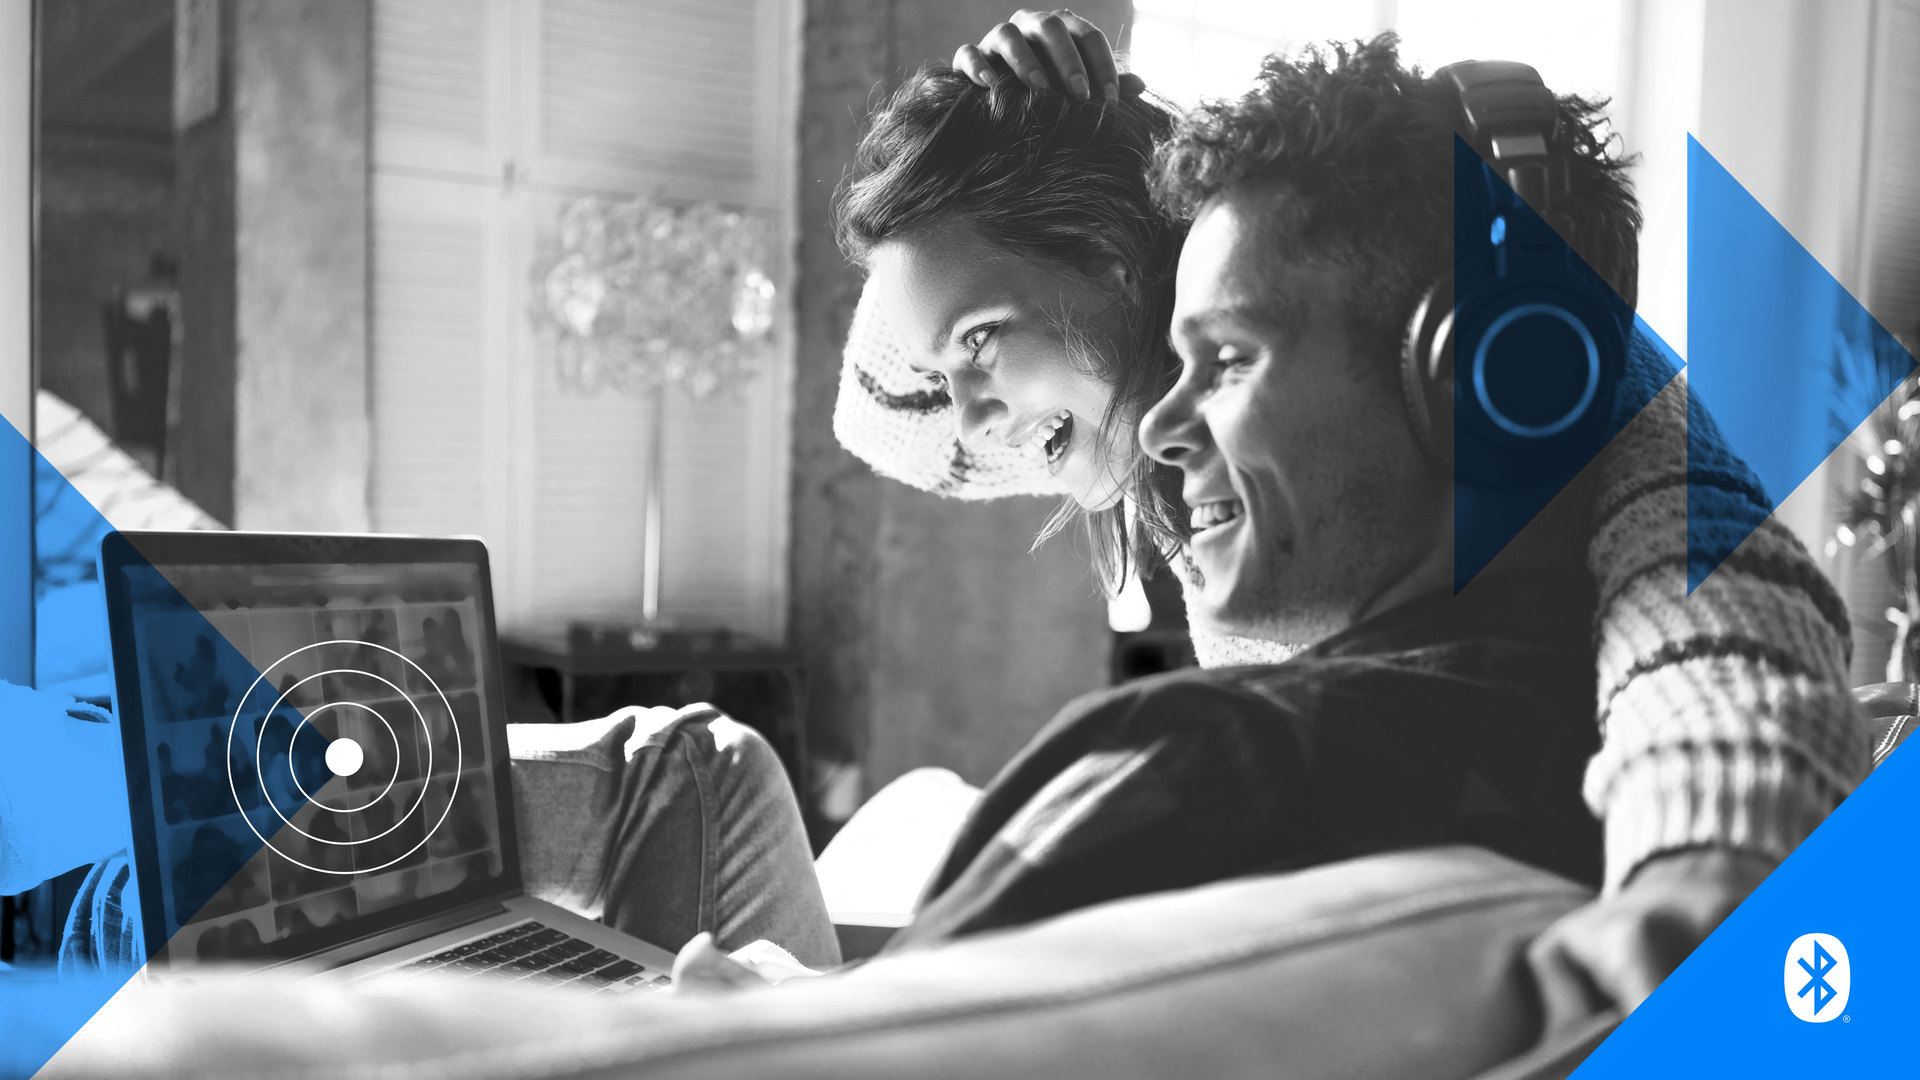 A picture of a man and a woman smiling at a laptop screen.